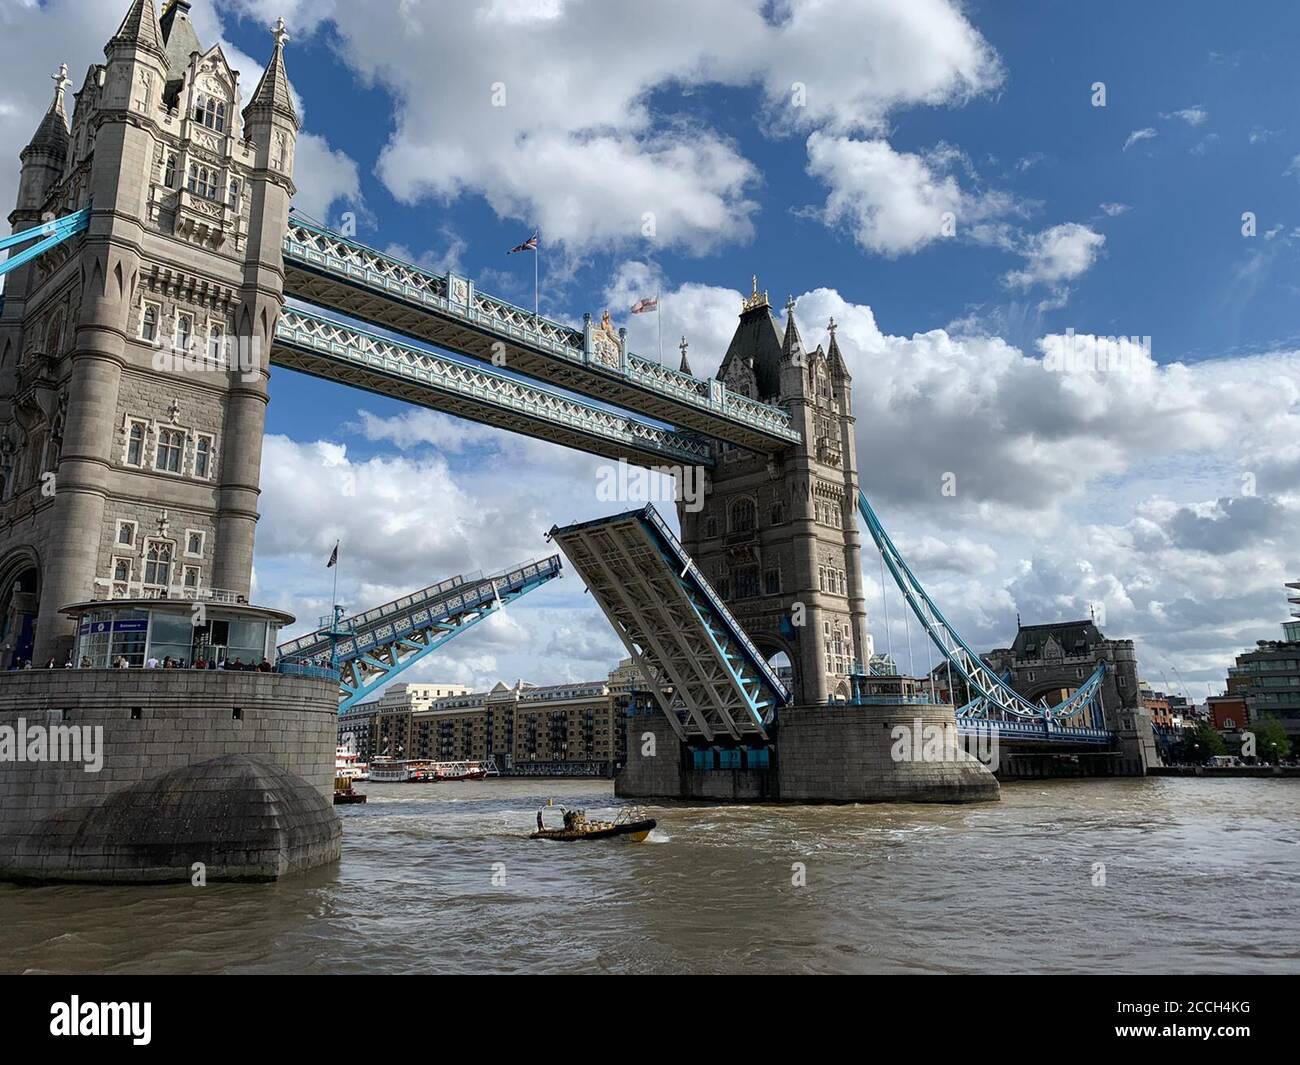 Saturday 22nd August, United Kingdom London Tower Bridge bascules had a mechanical fault got stuck cause major traffic standstill Stock Photo